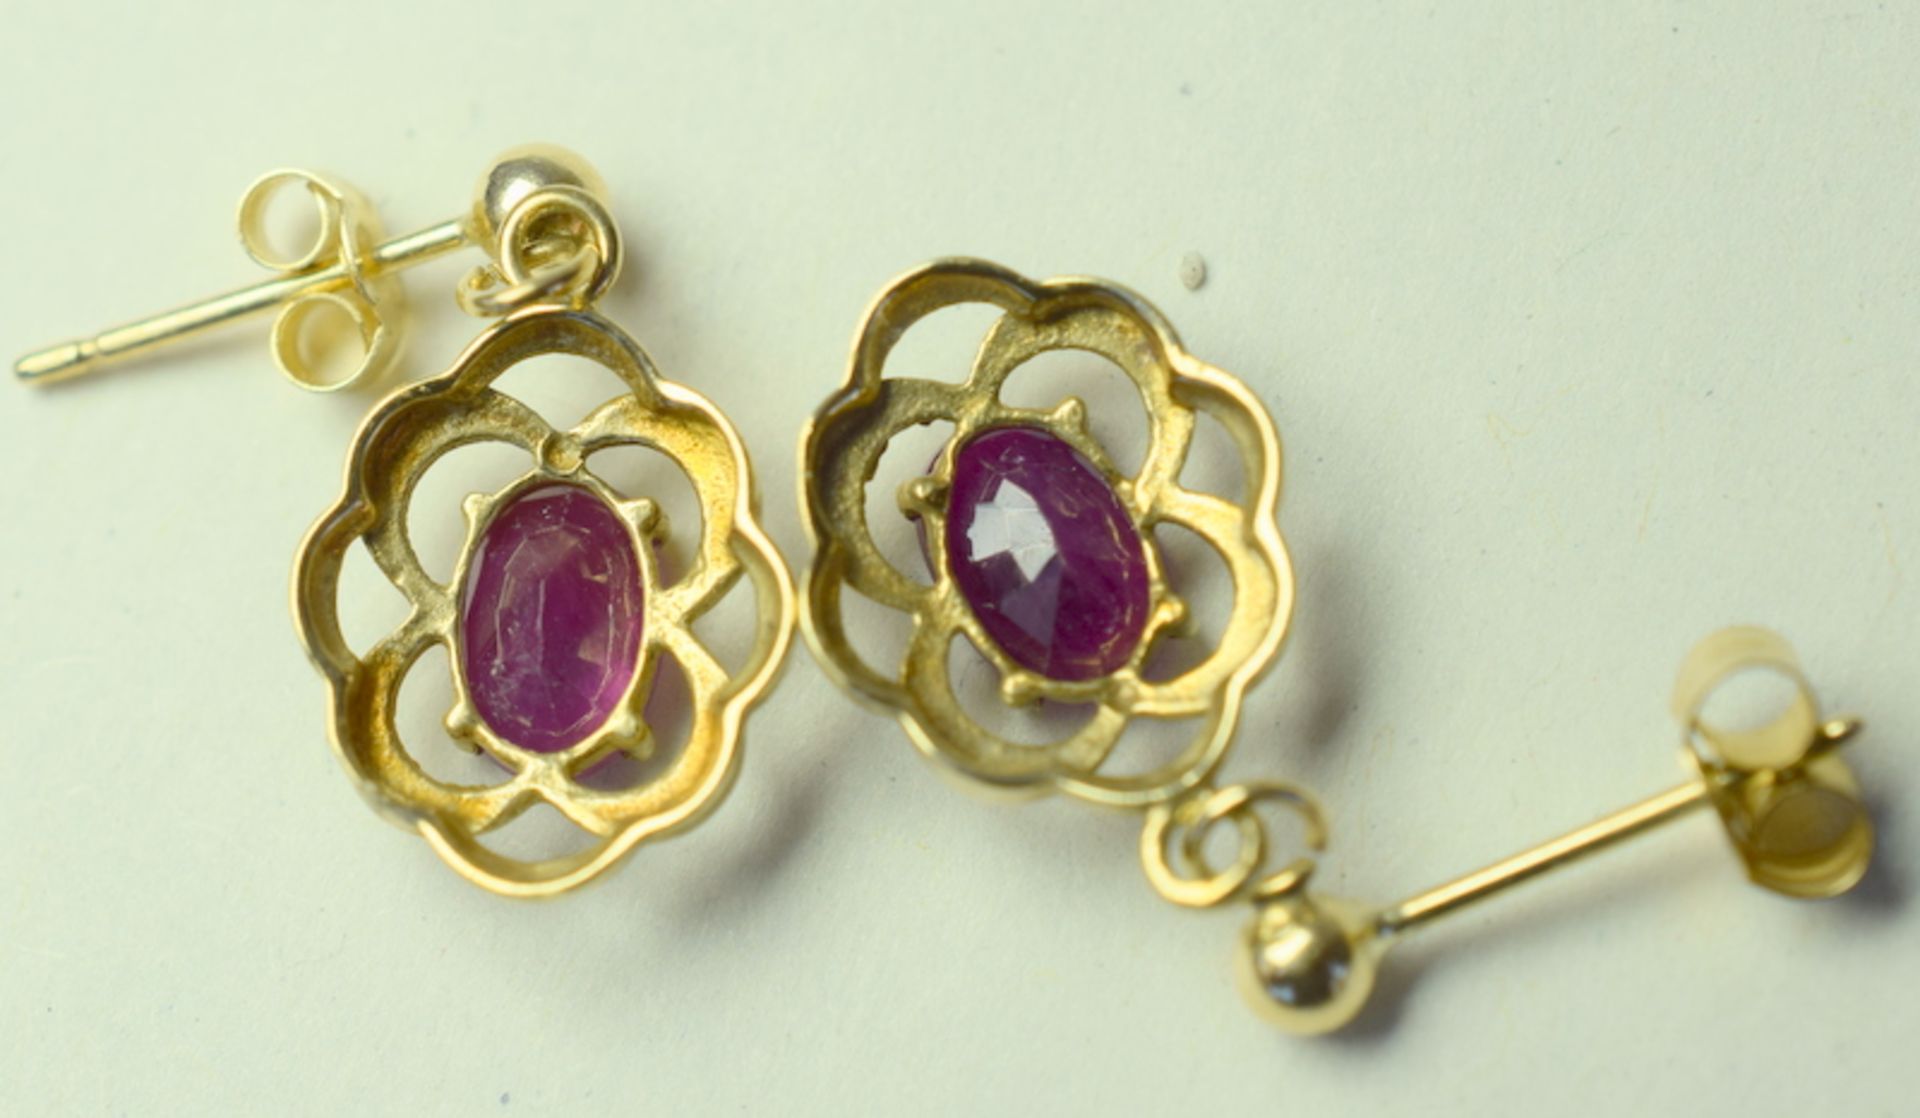 9ct Gold and Ruby Drop Earrings - Image 3 of 3